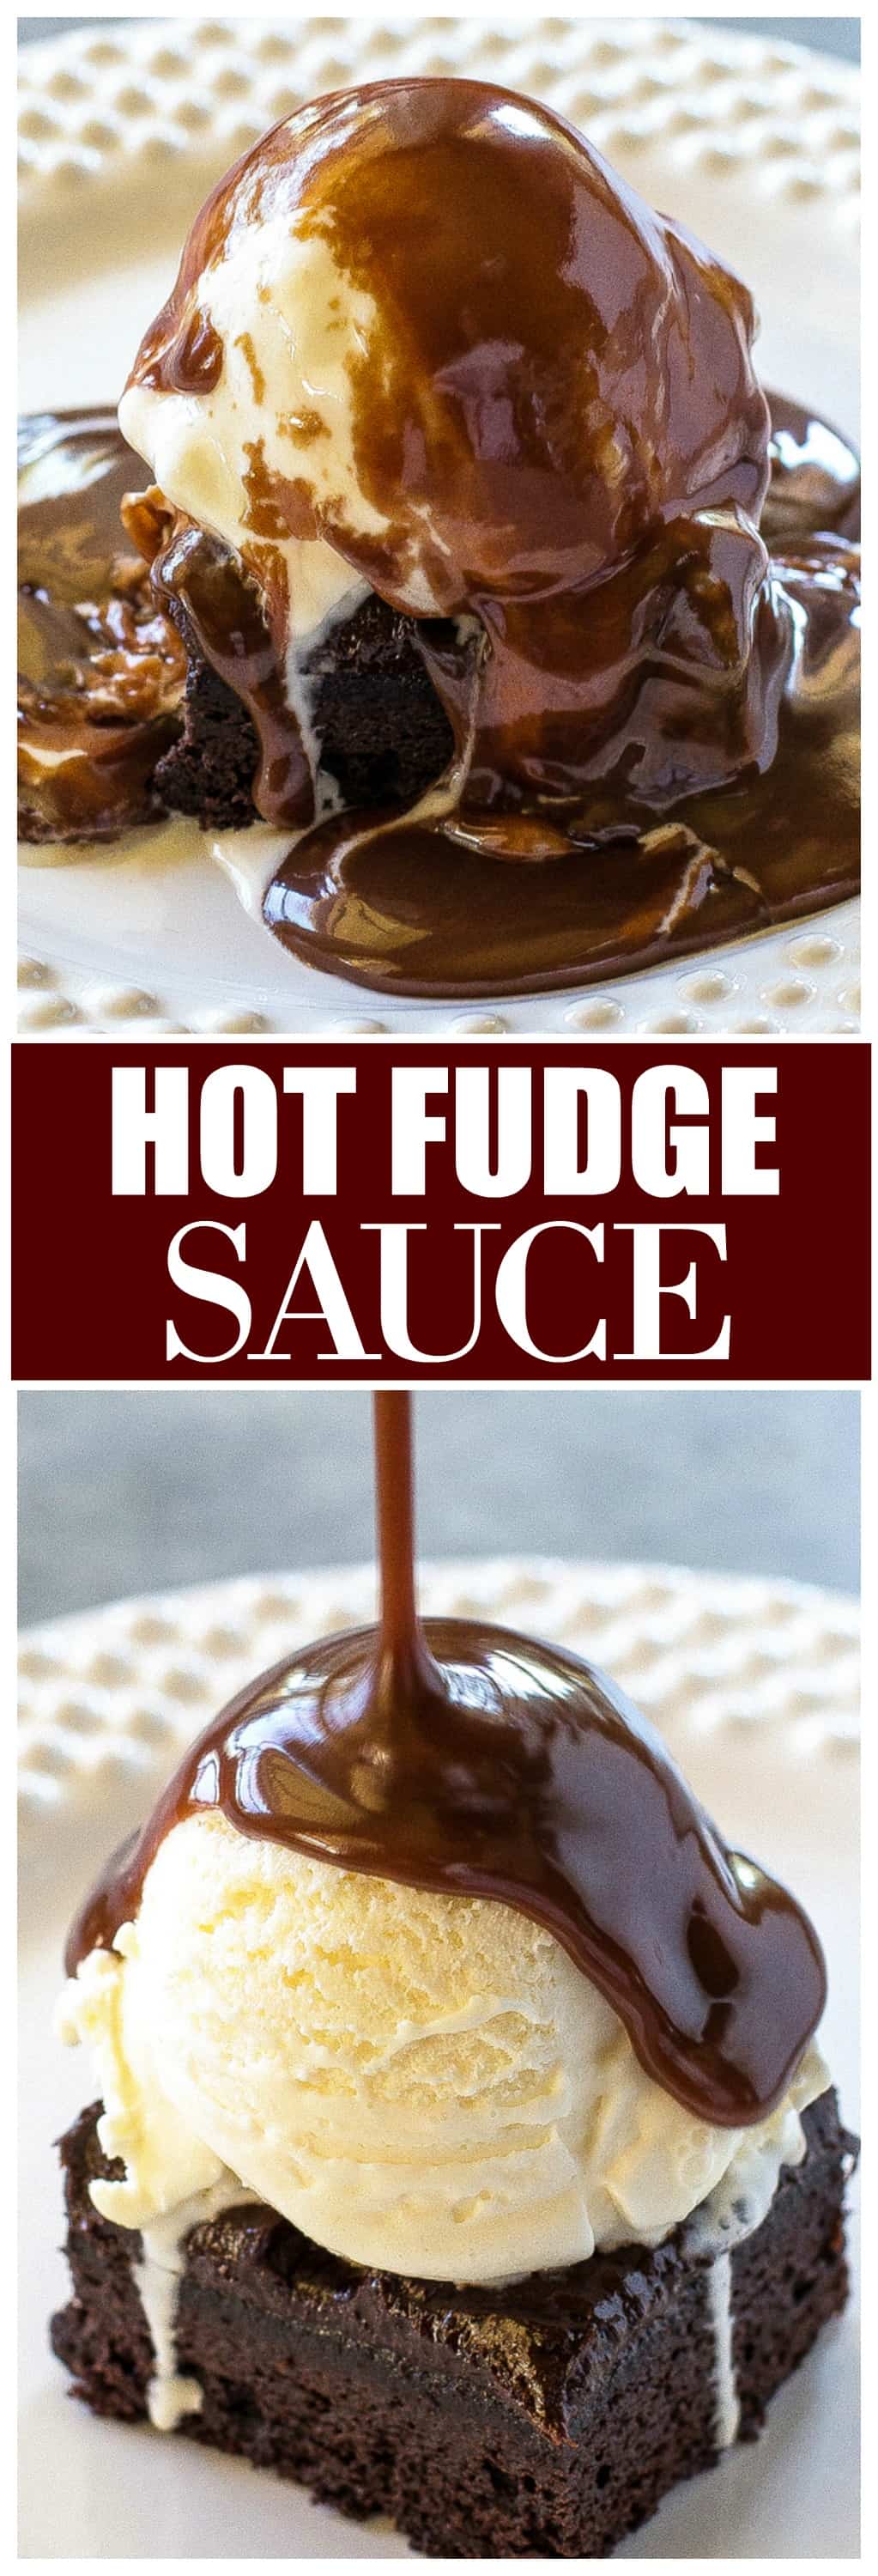 Hot Fudge Sauce being poured on ice cream on a plate